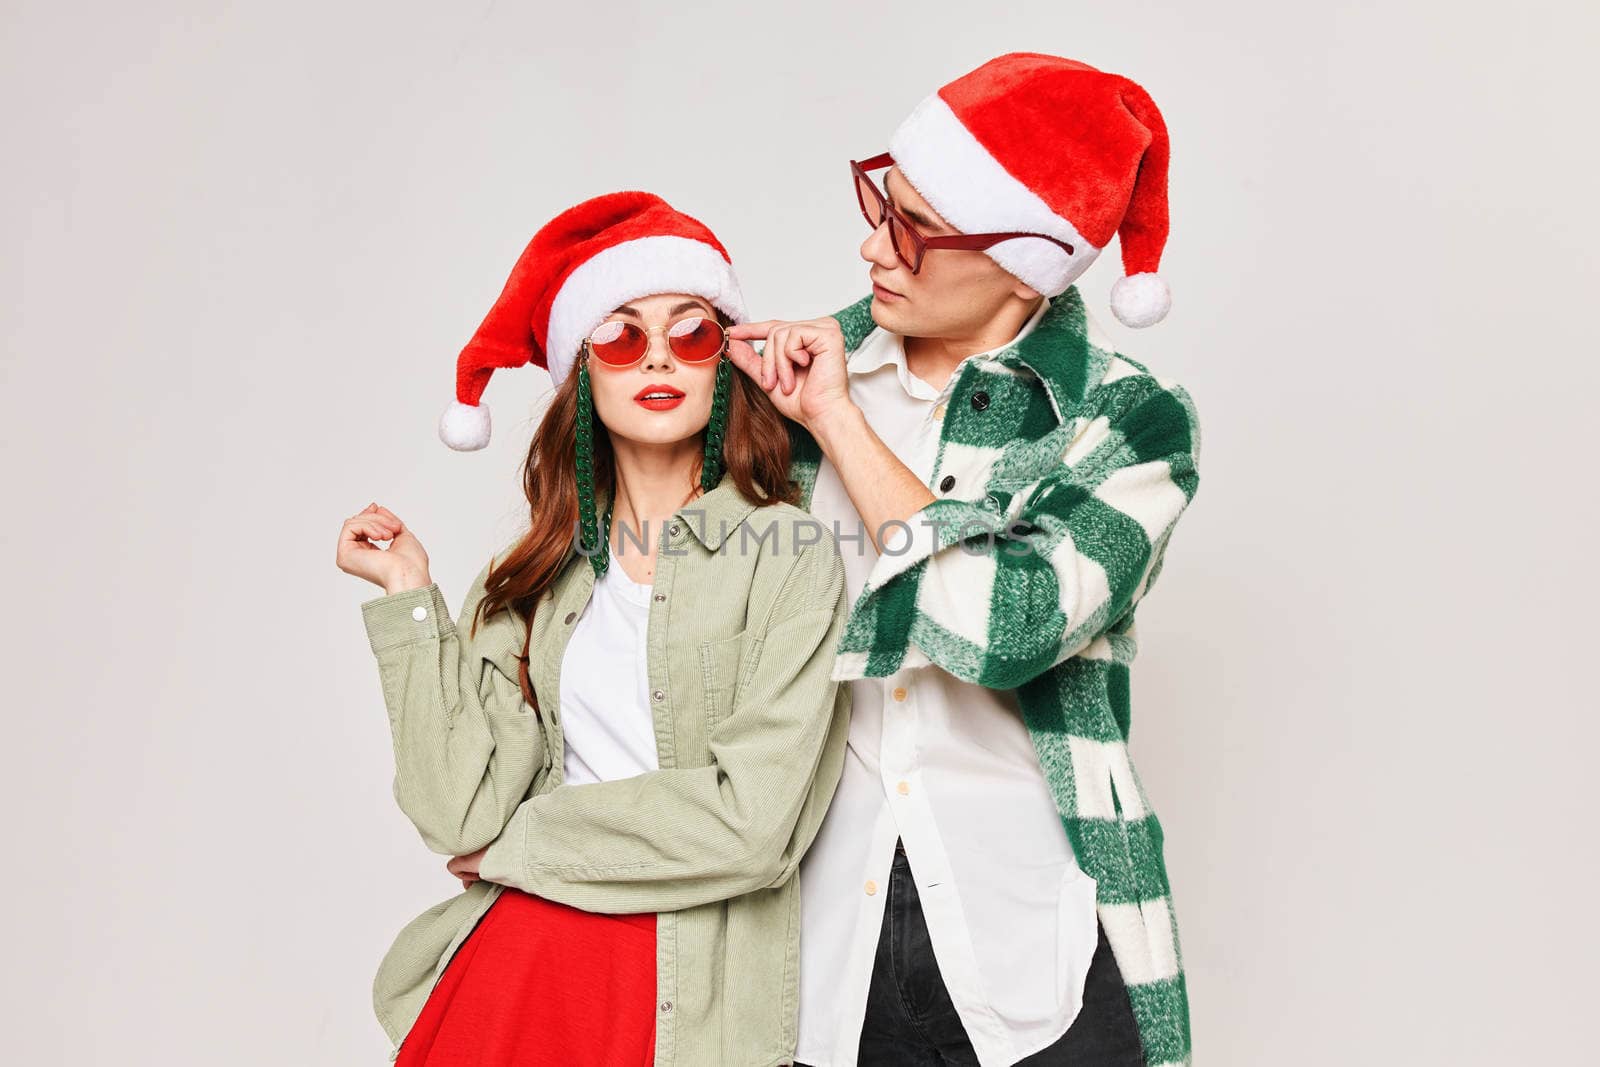 Man and woman in Christmas hats Christmas fun celebration together. High quality photo